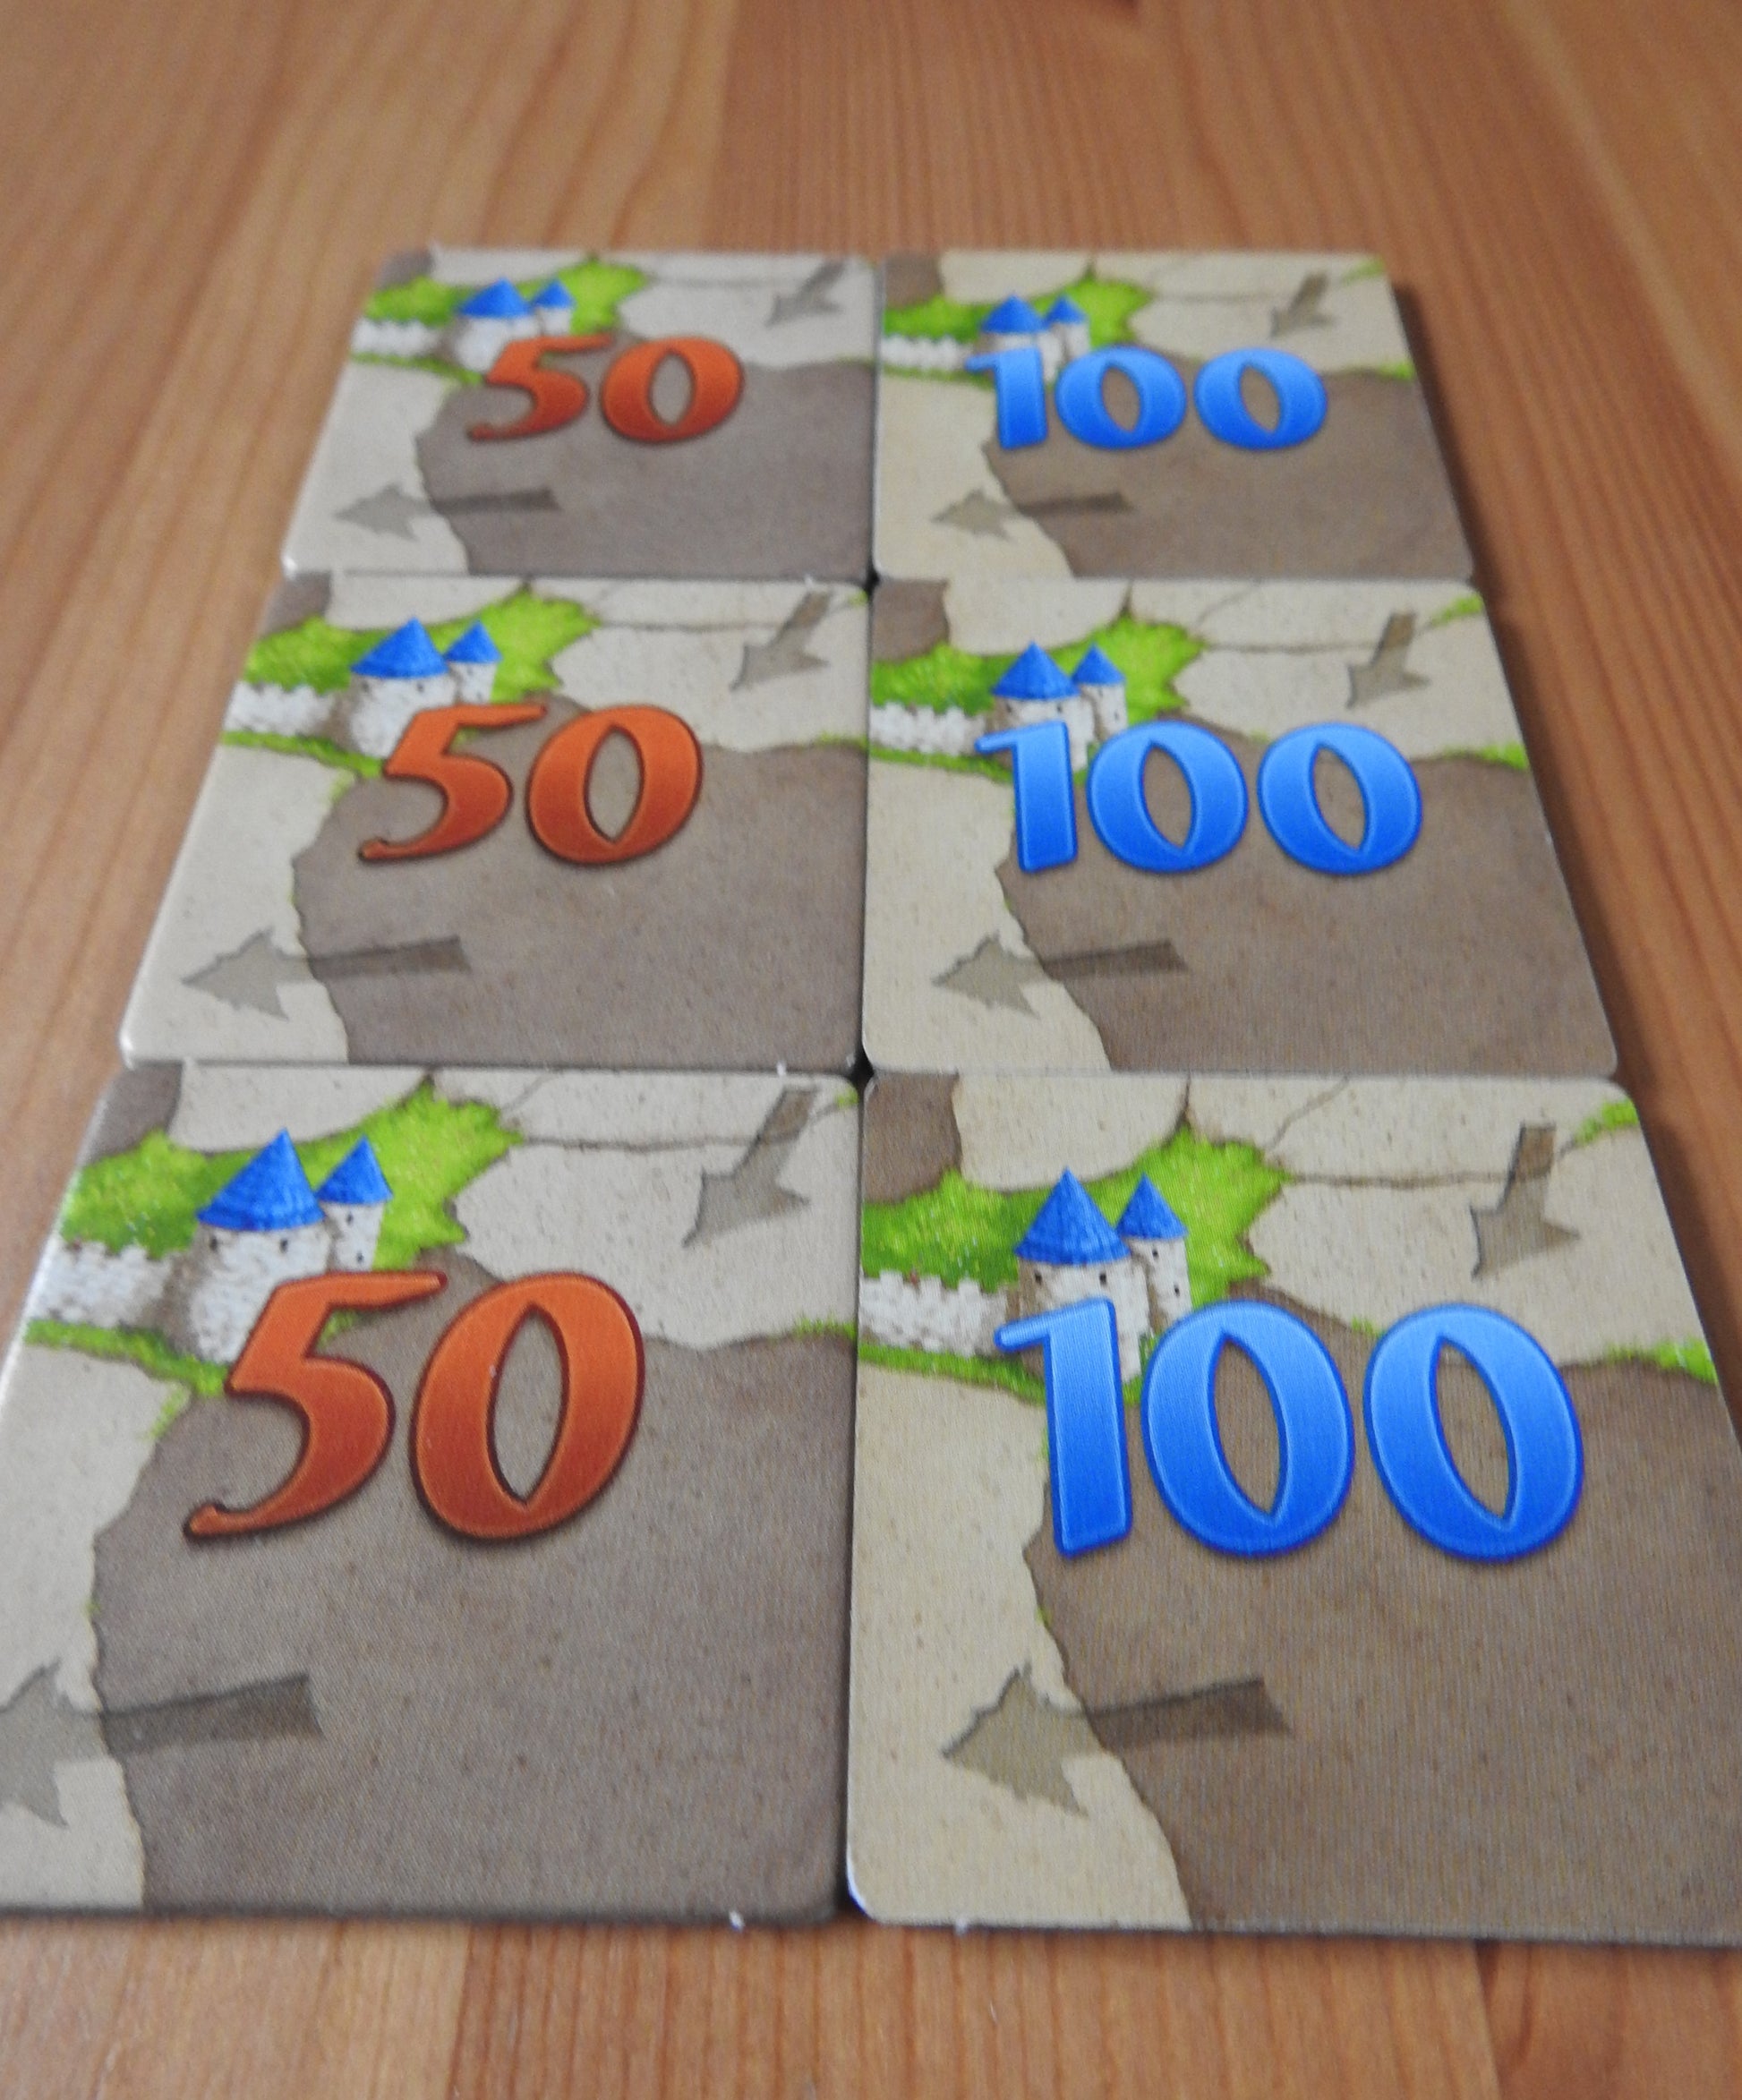 Another view of all 6 of the tiles included with this 6 Extra Scoring Tiles accessory for Carcassonne.